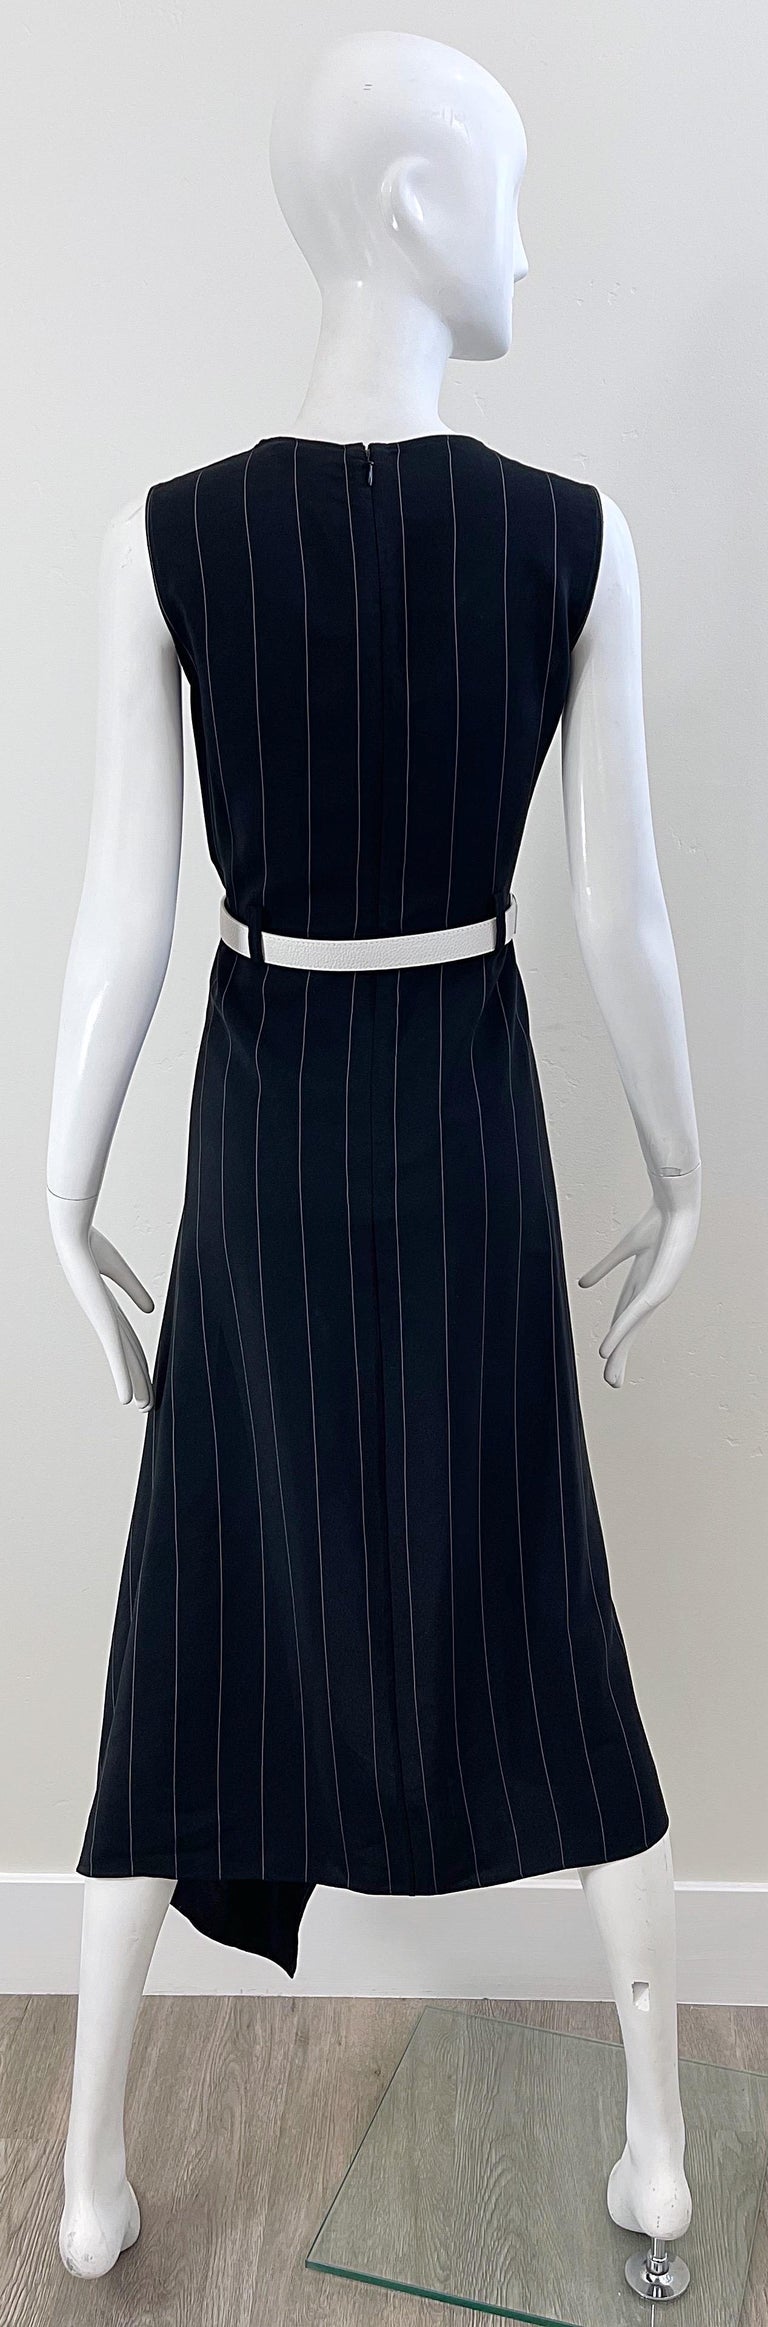 2000s Thierry Mugler Black and White Size 38 / 6 Pinstripe Hi-Lo Vintage Dress For Sale 12